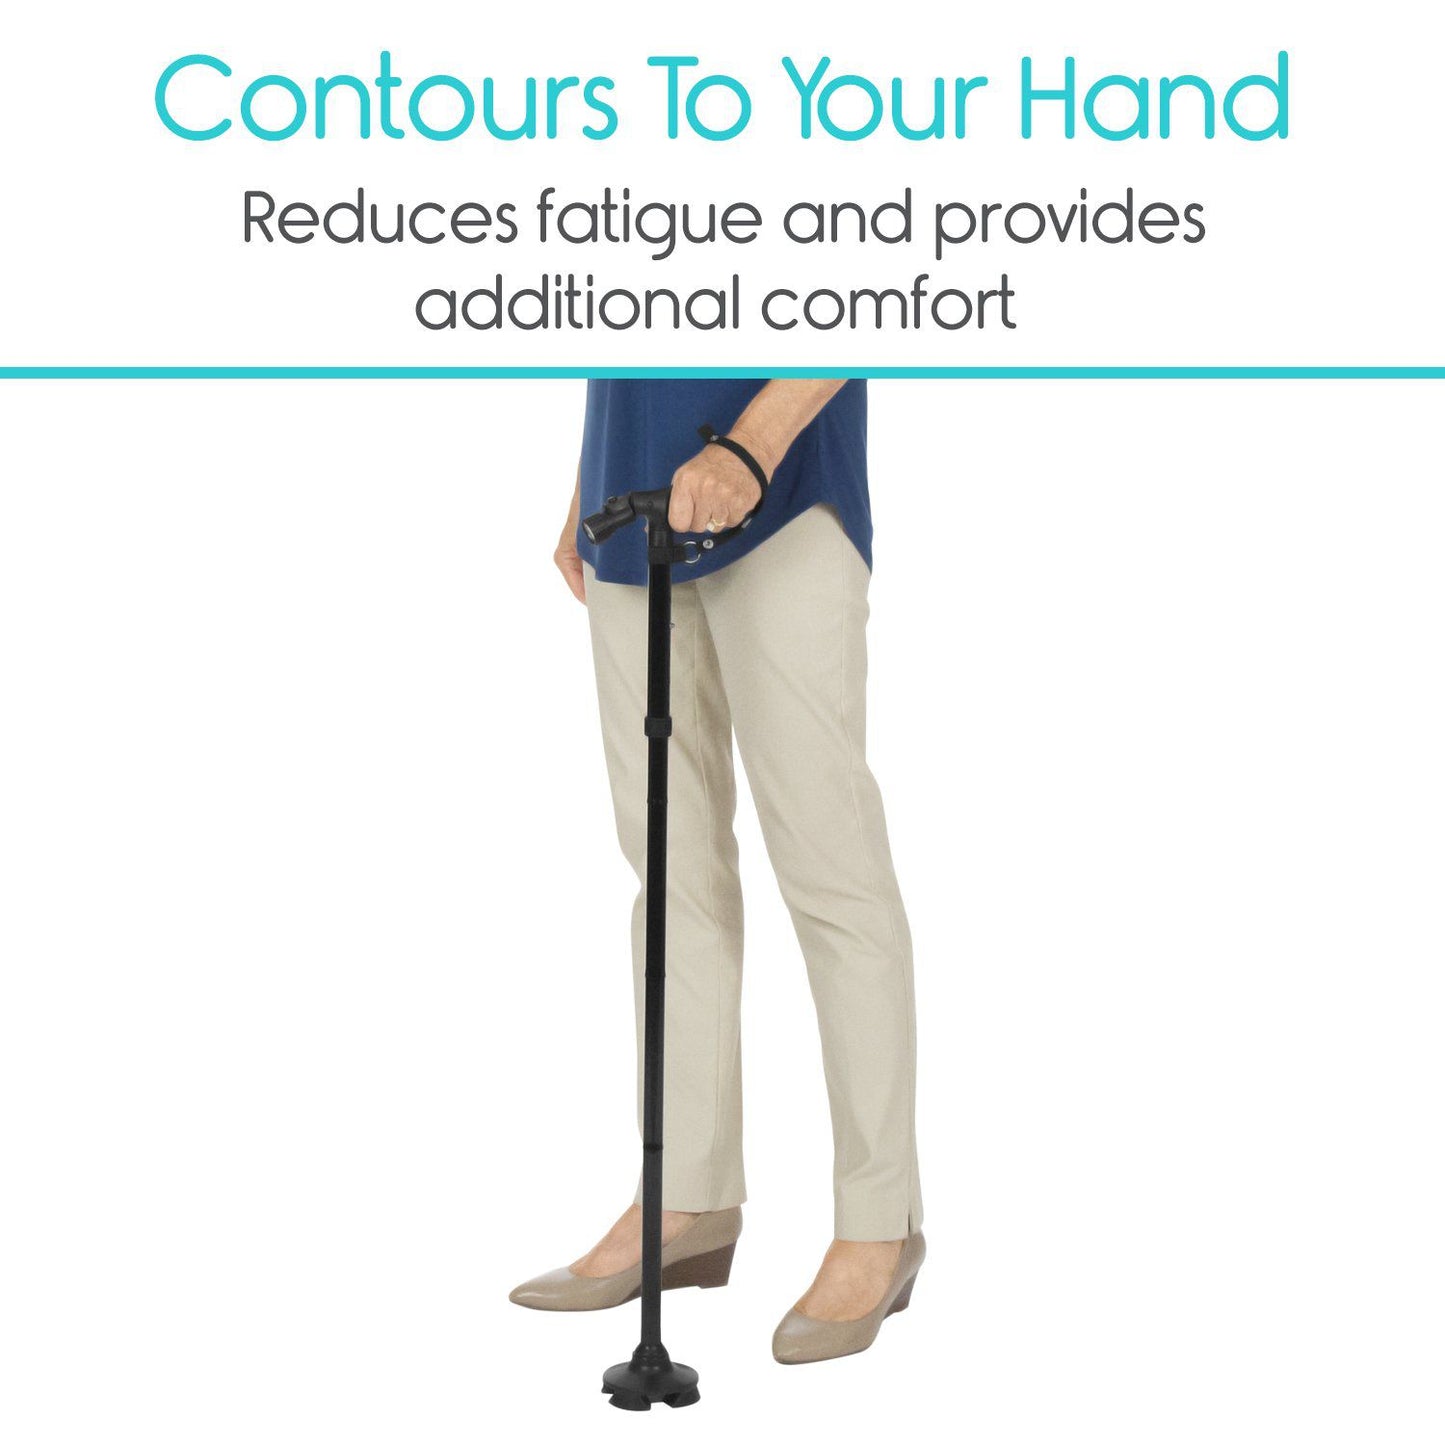 Vive Health Folding Self Standing Cane, Portable, Adjustable Height, w/ LED Light For Safety at Night